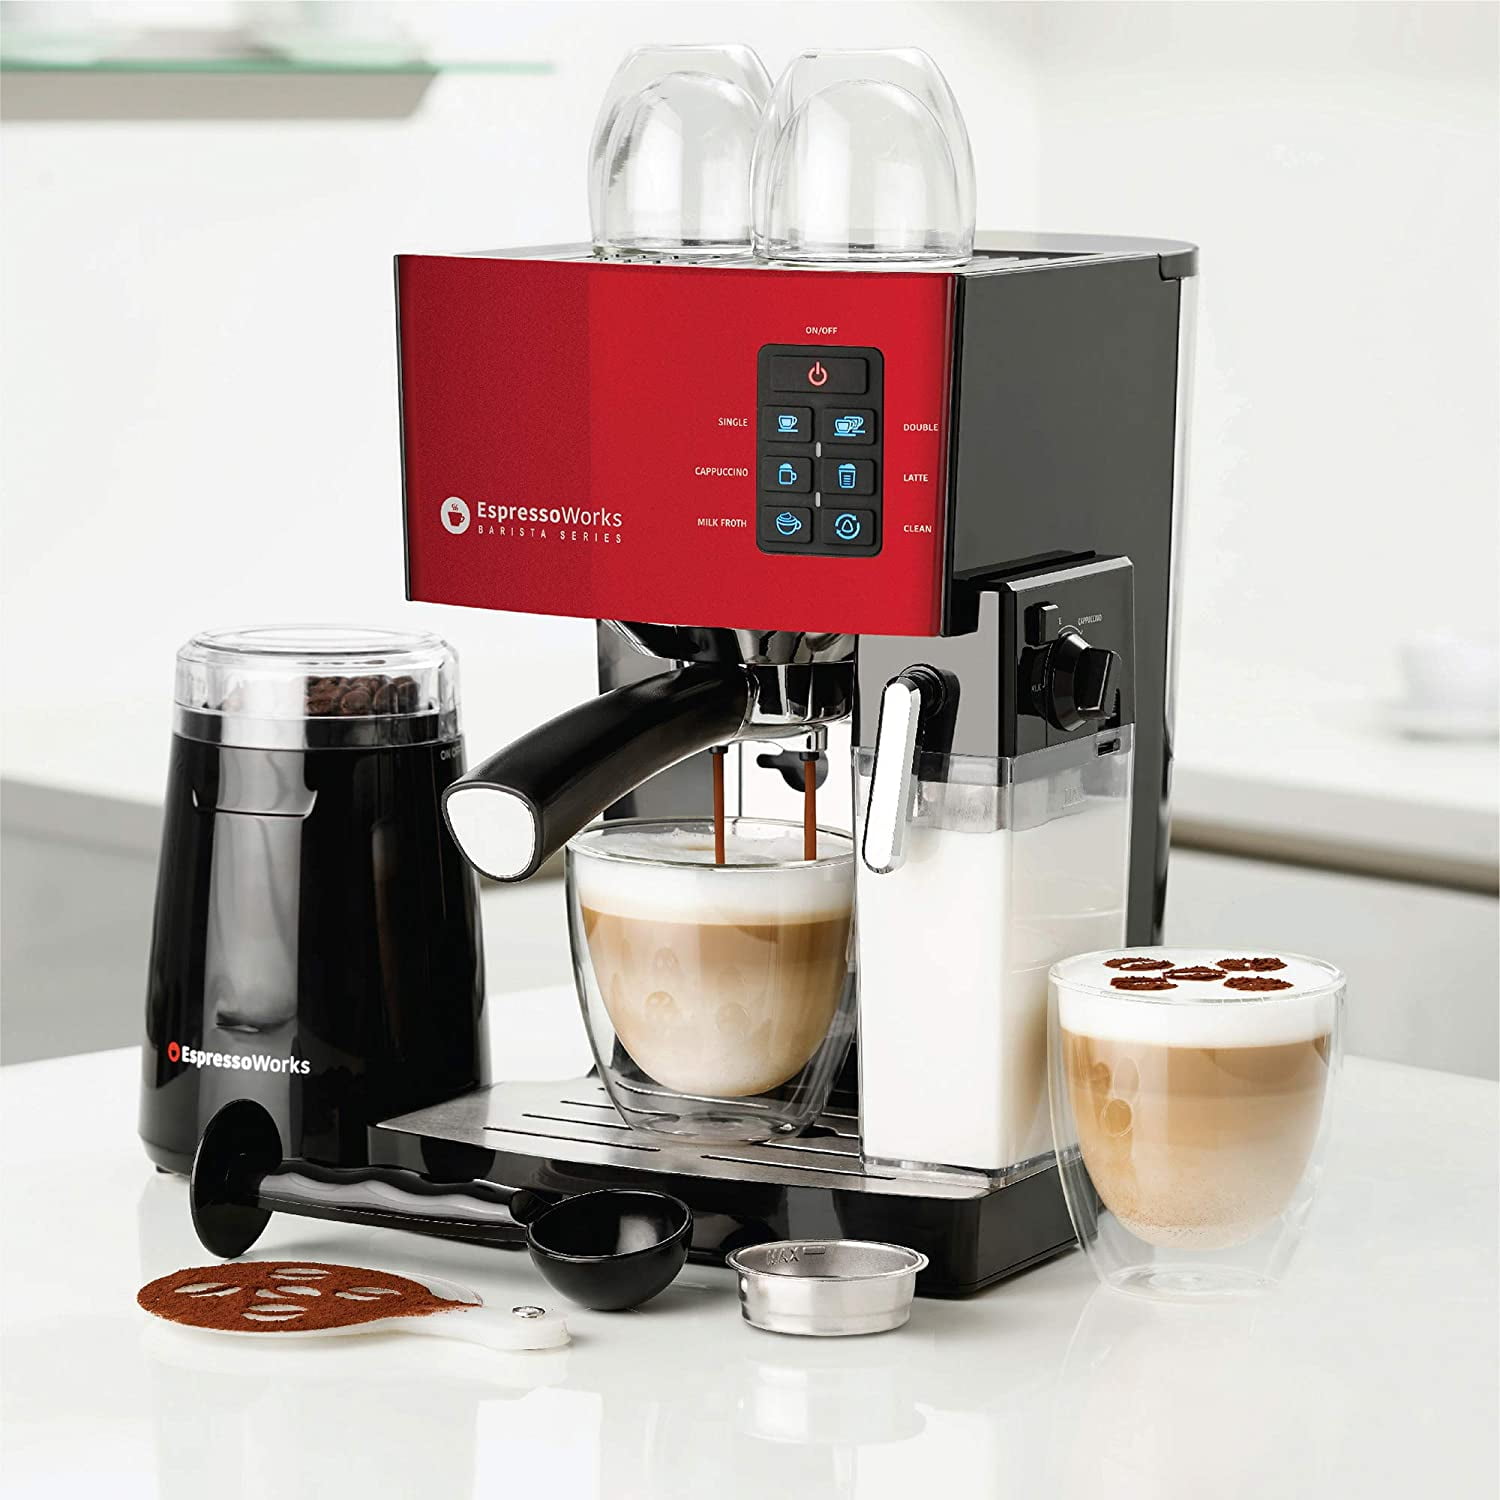 Illy Milk Frother CAPPUCCINO Maker Milk Foamer Cappuccino Maker 220V Steel